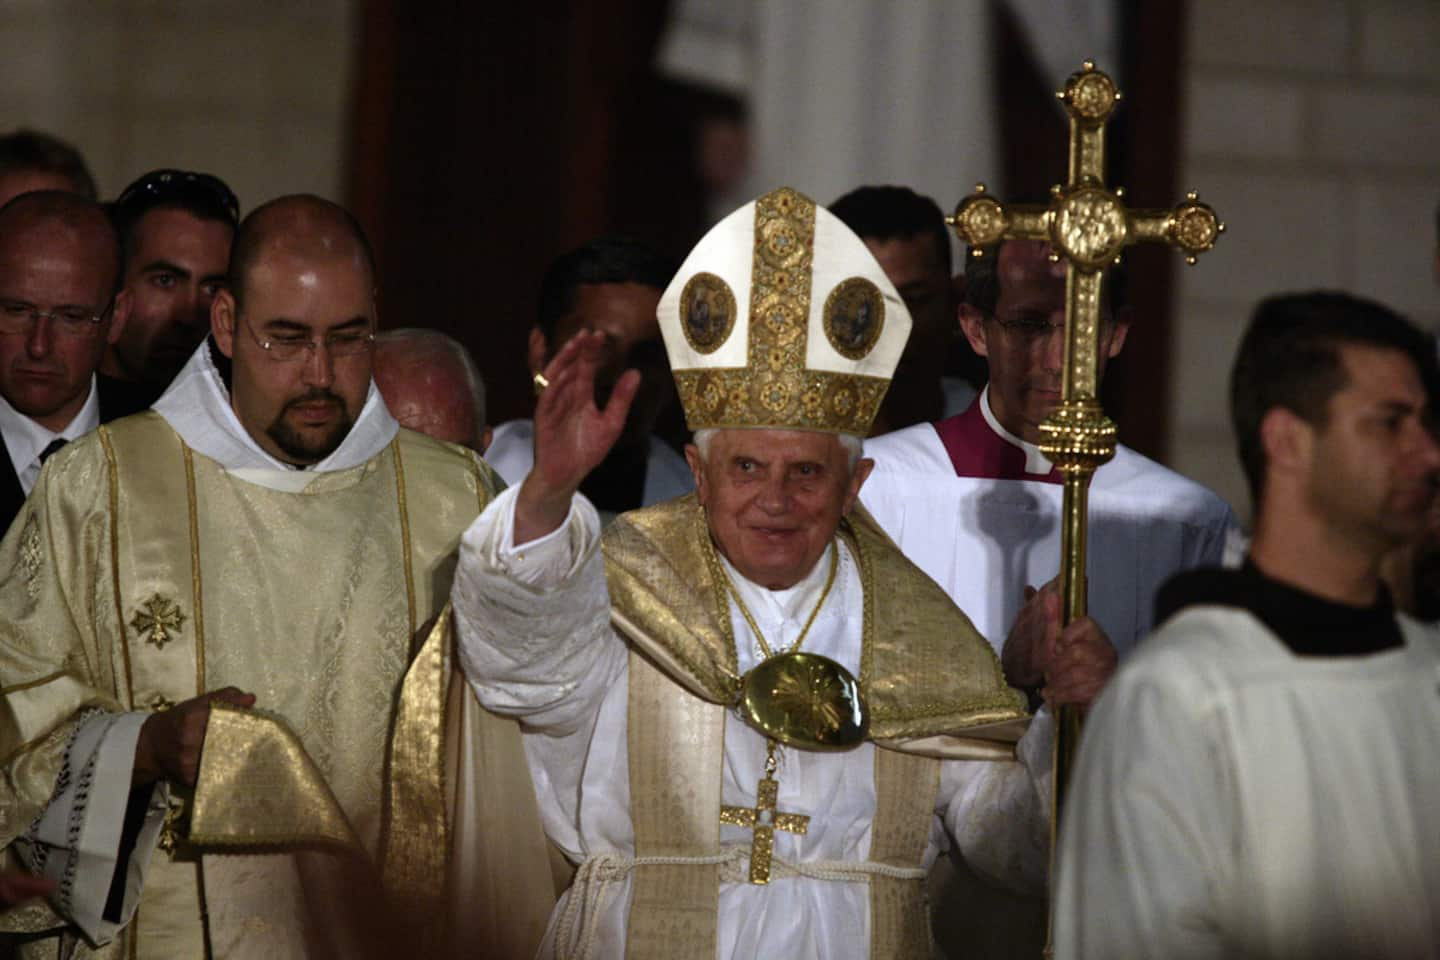 The body of Benedict XVI exposed to the faithful at Saint Peter's in Rome